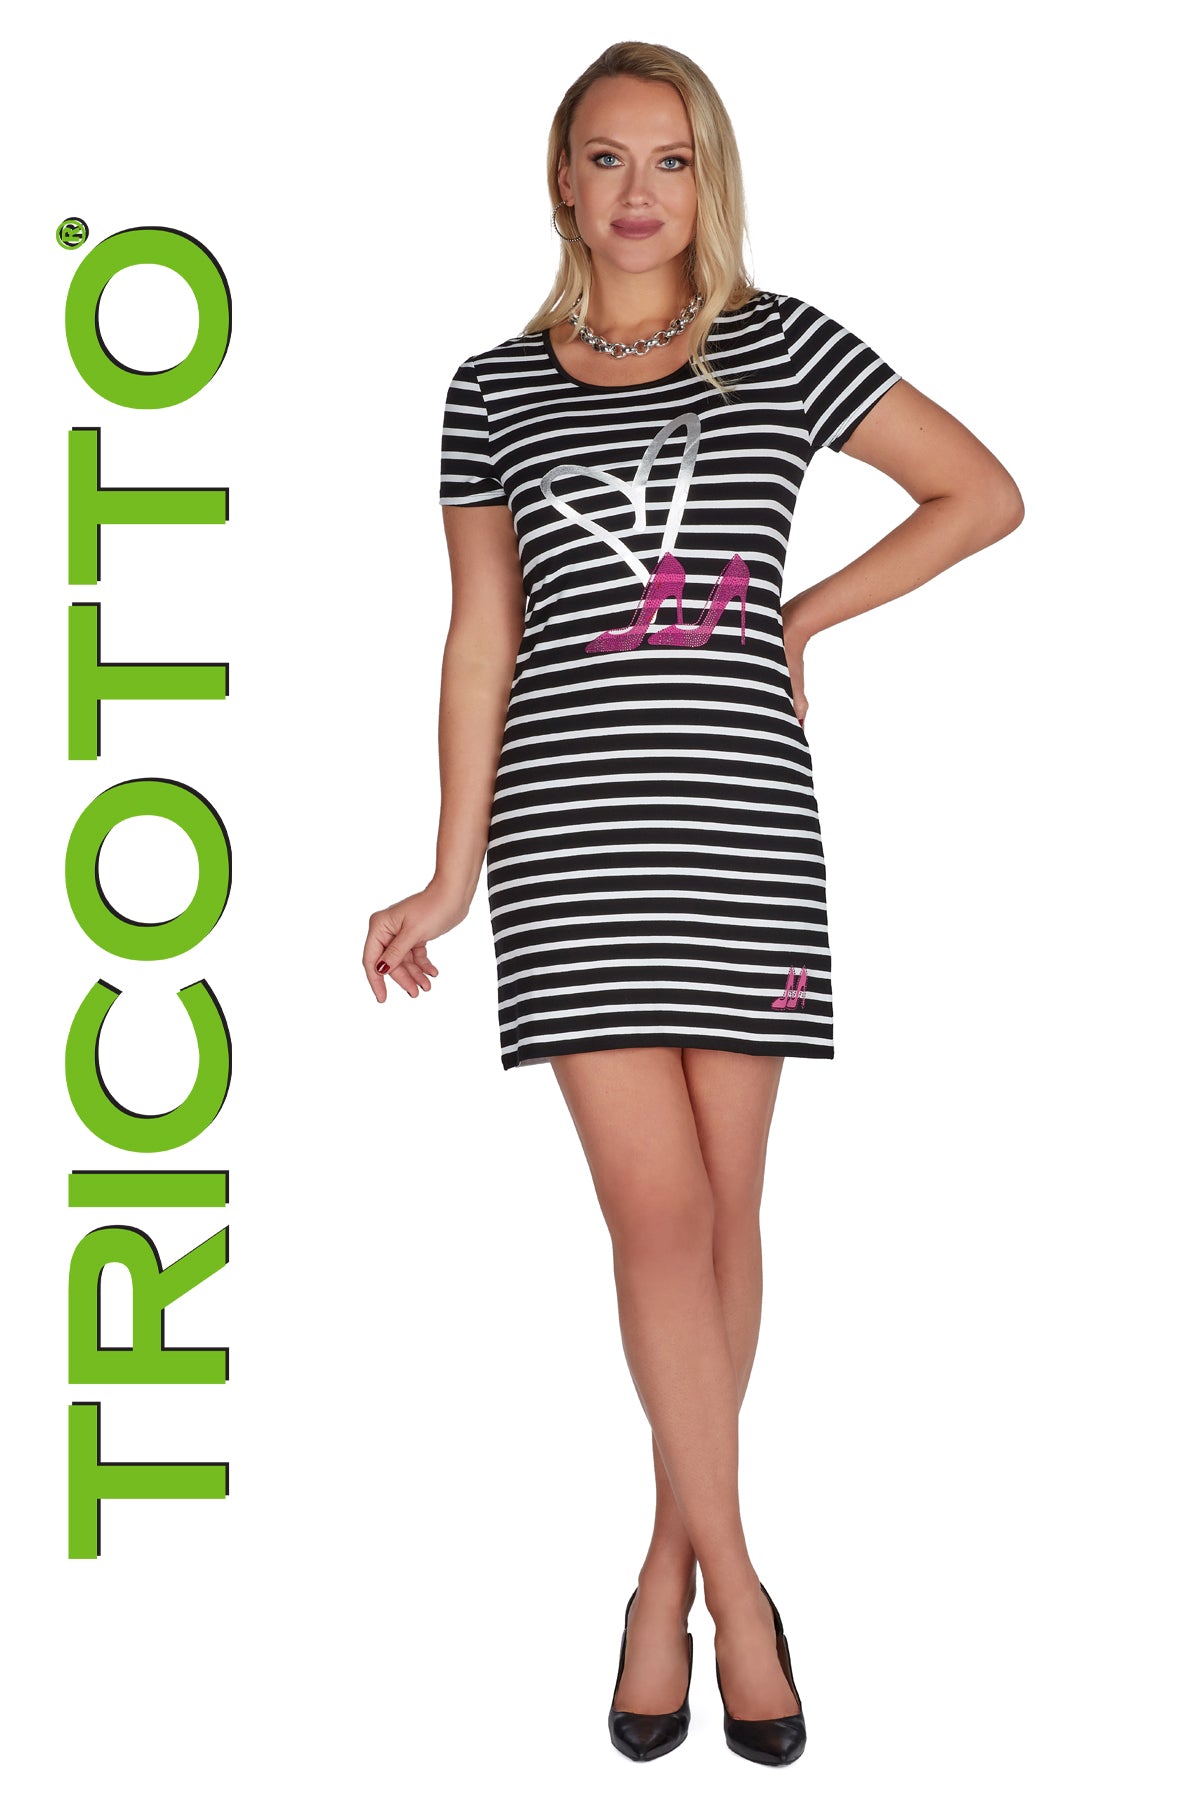 Tricotto High Heels Dress-Buy Tricotto Dresses Online-Tricotto Clothing Montreal-Women's T-shirt Dresses Online Canada